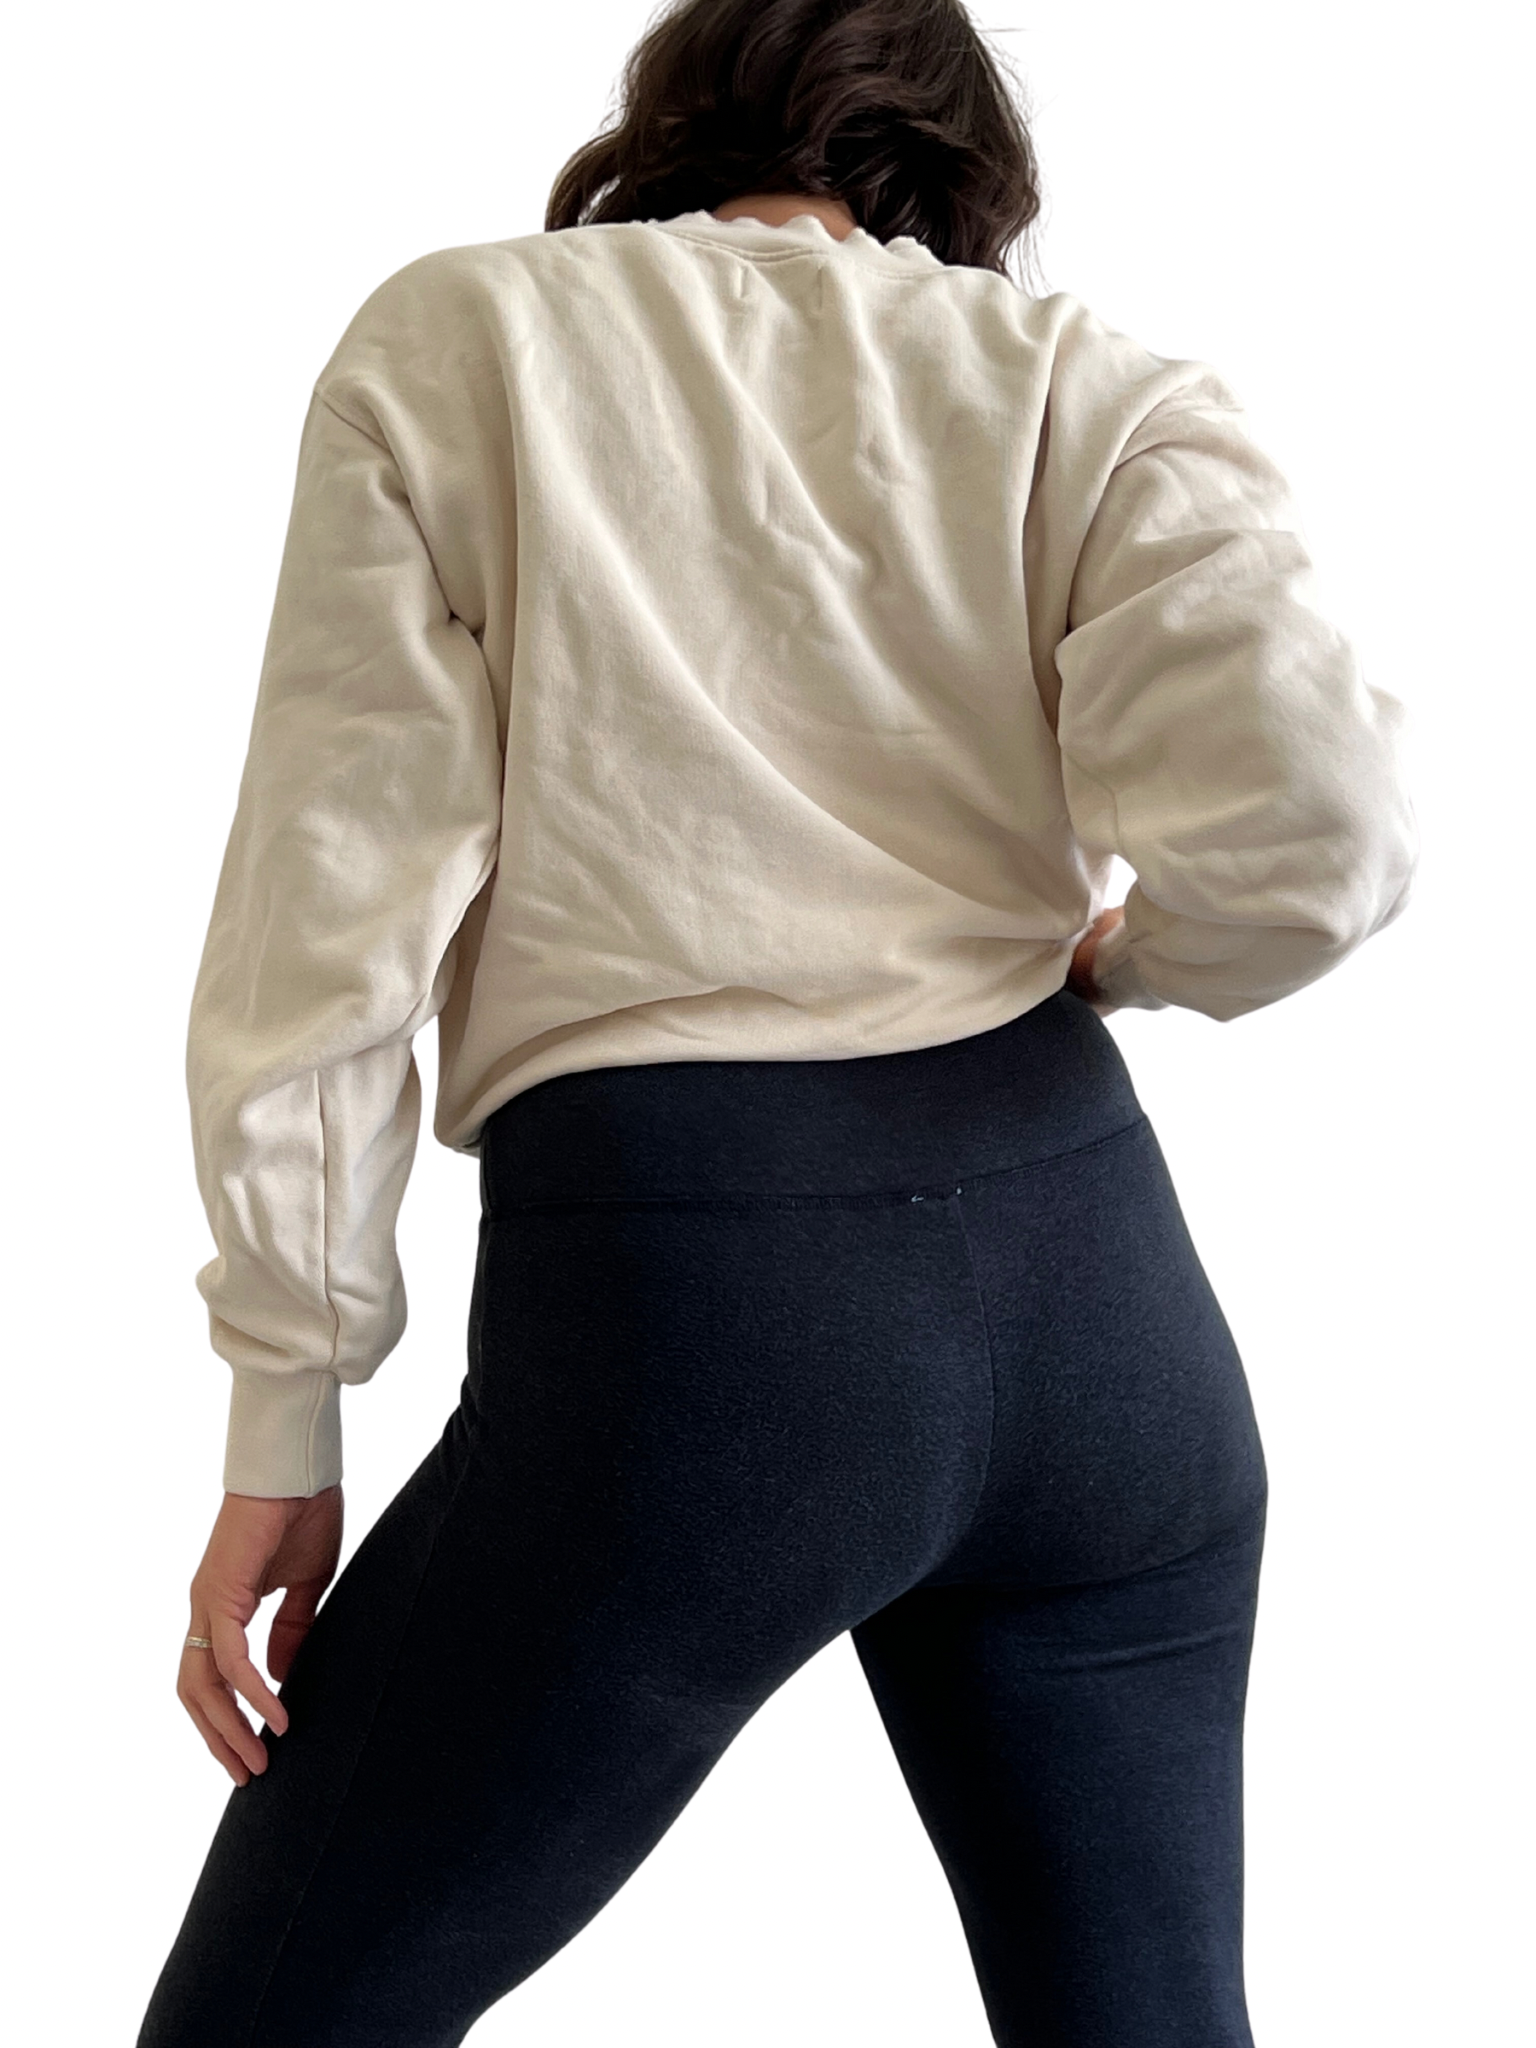 Polyester Free Leggings, made with Organic Cotton